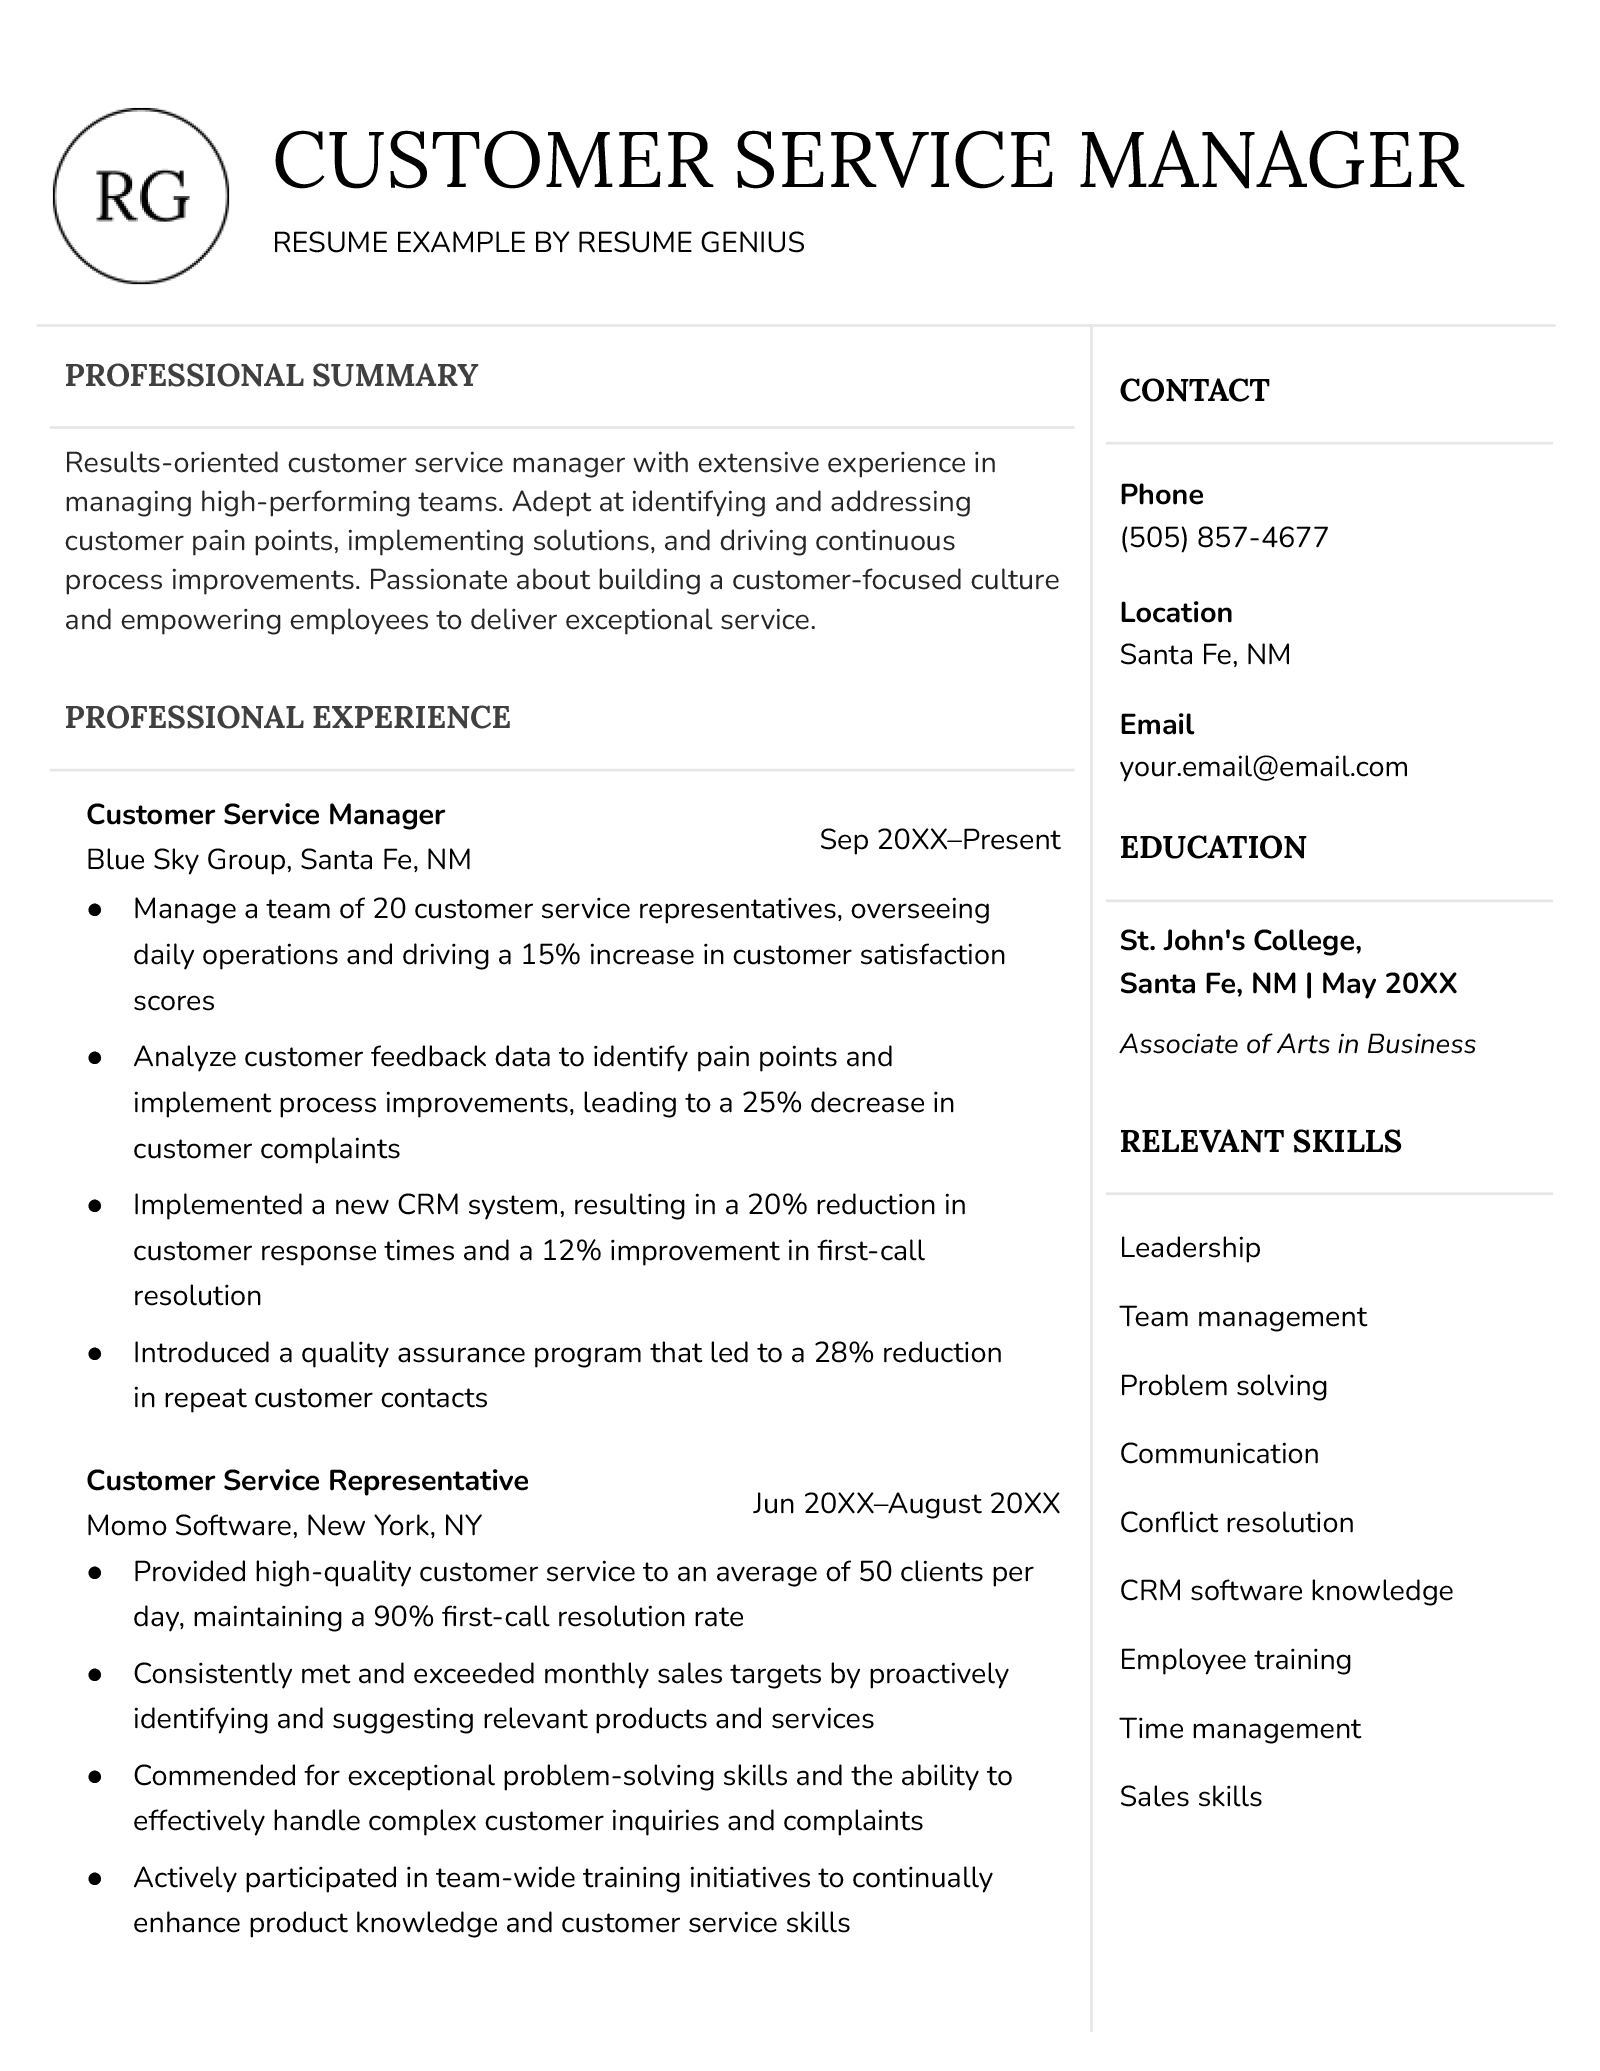 An example of a resume for a customer service manager.